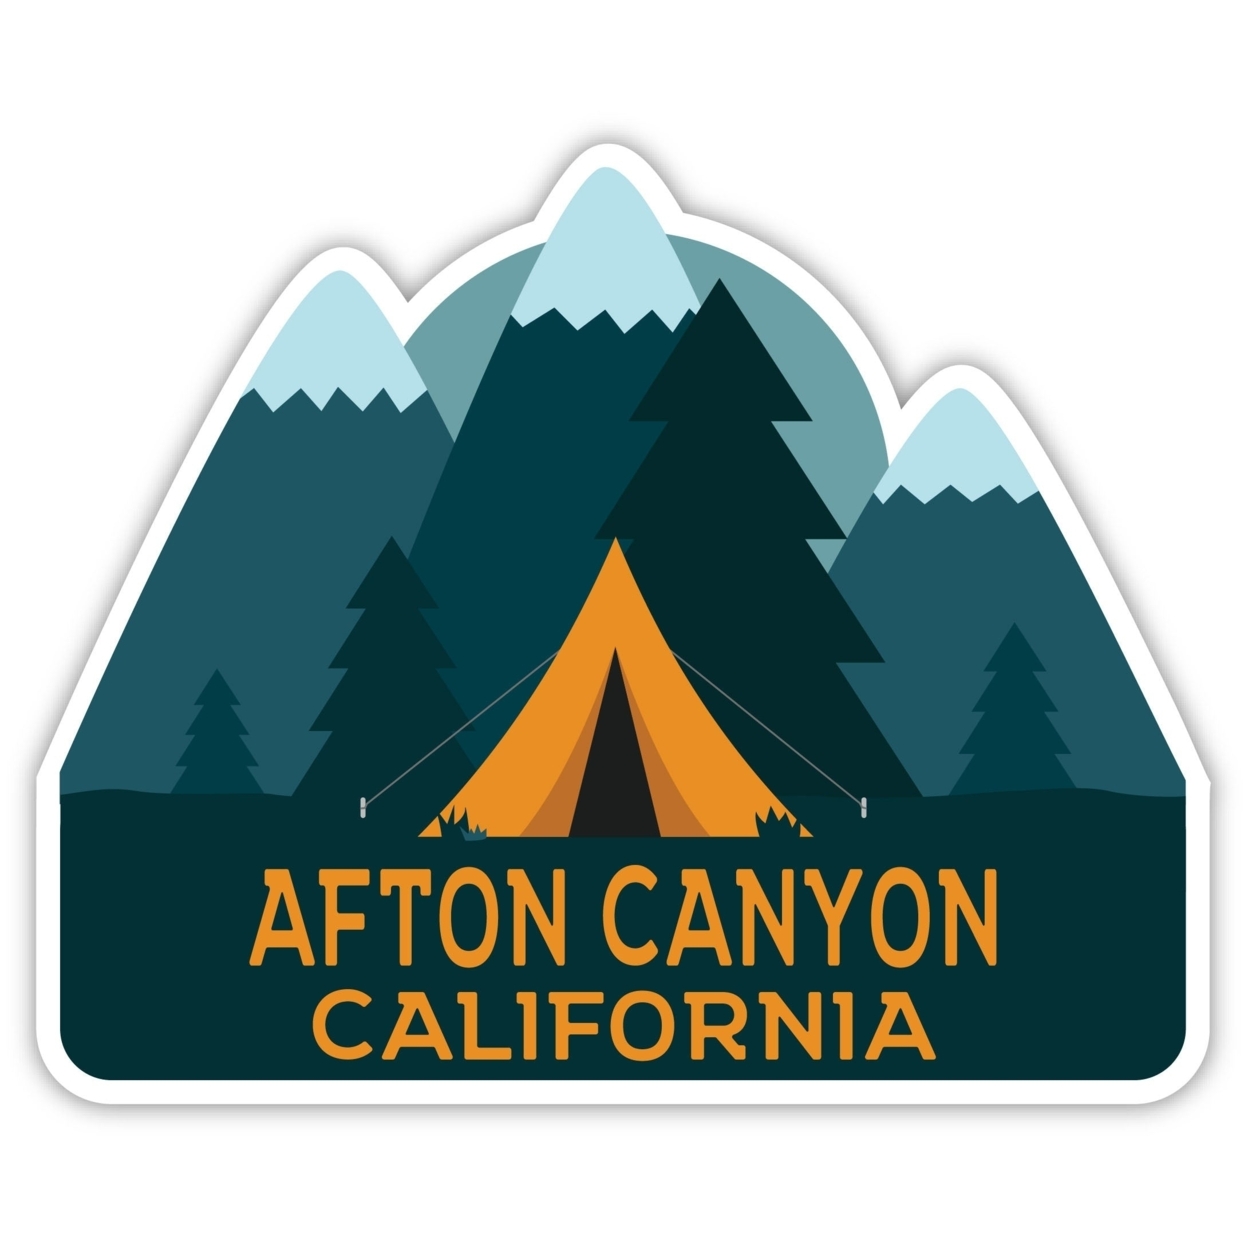 Afton Canyon California Souvenir Decorative Stickers (Choose Theme And Size) - 4-Pack, 8-Inch, Tent